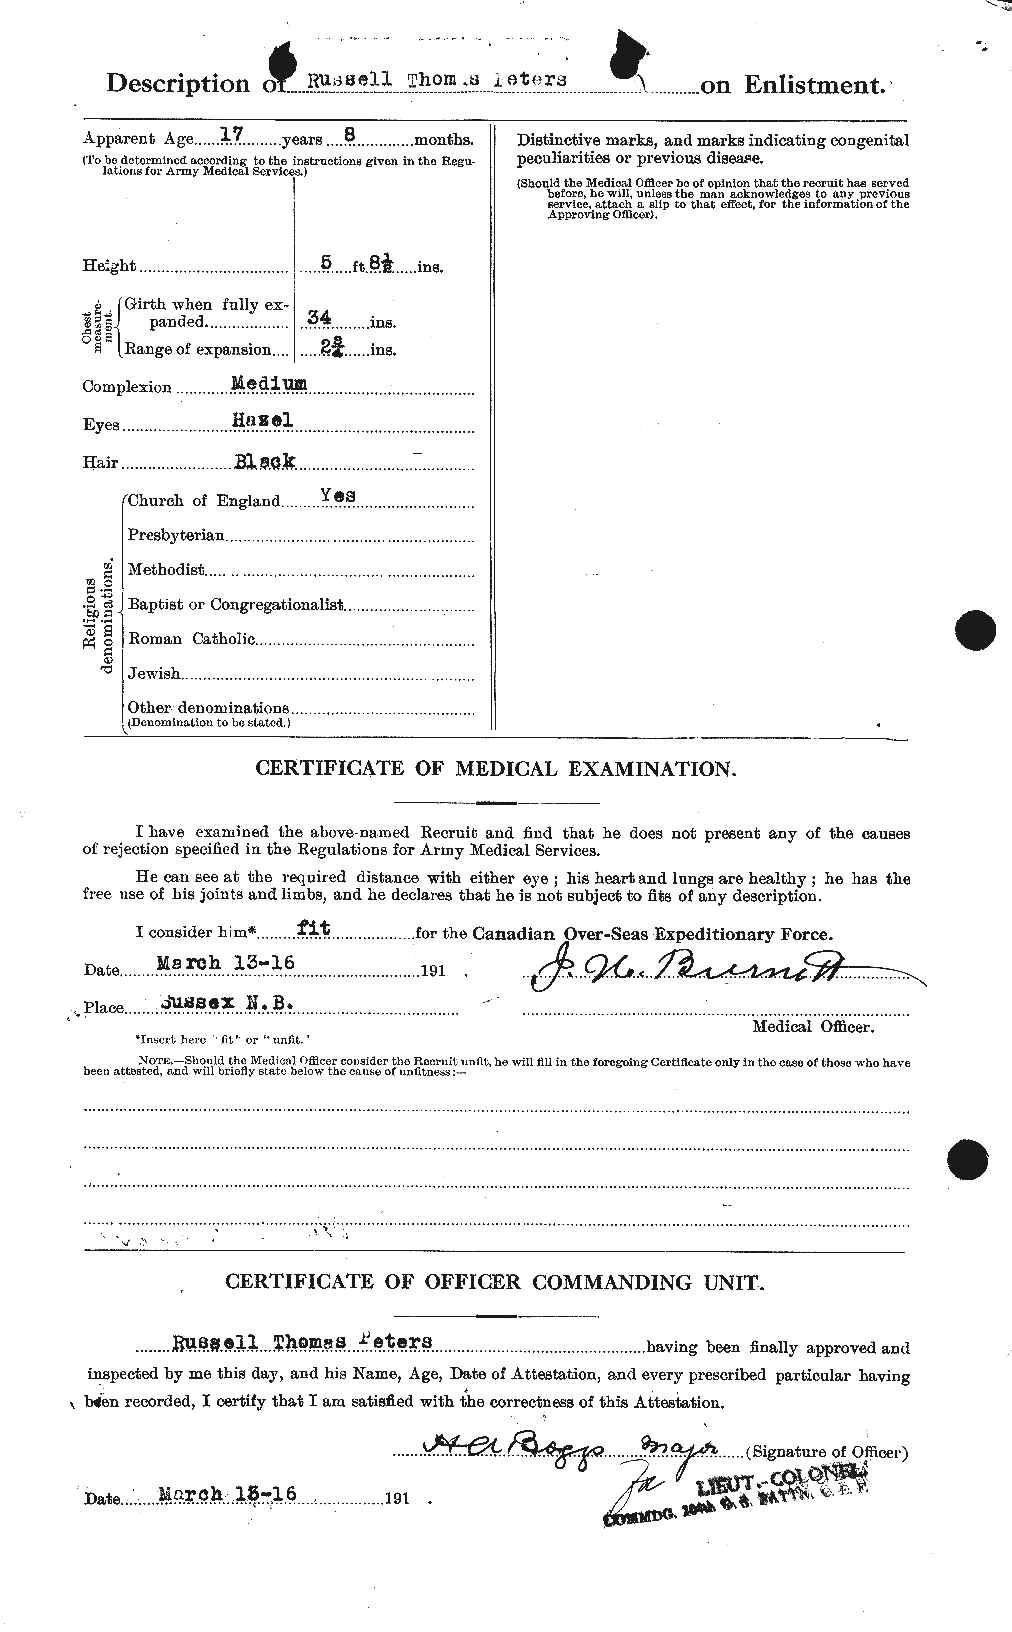 Personnel Records of the First World War - CEF 575619b